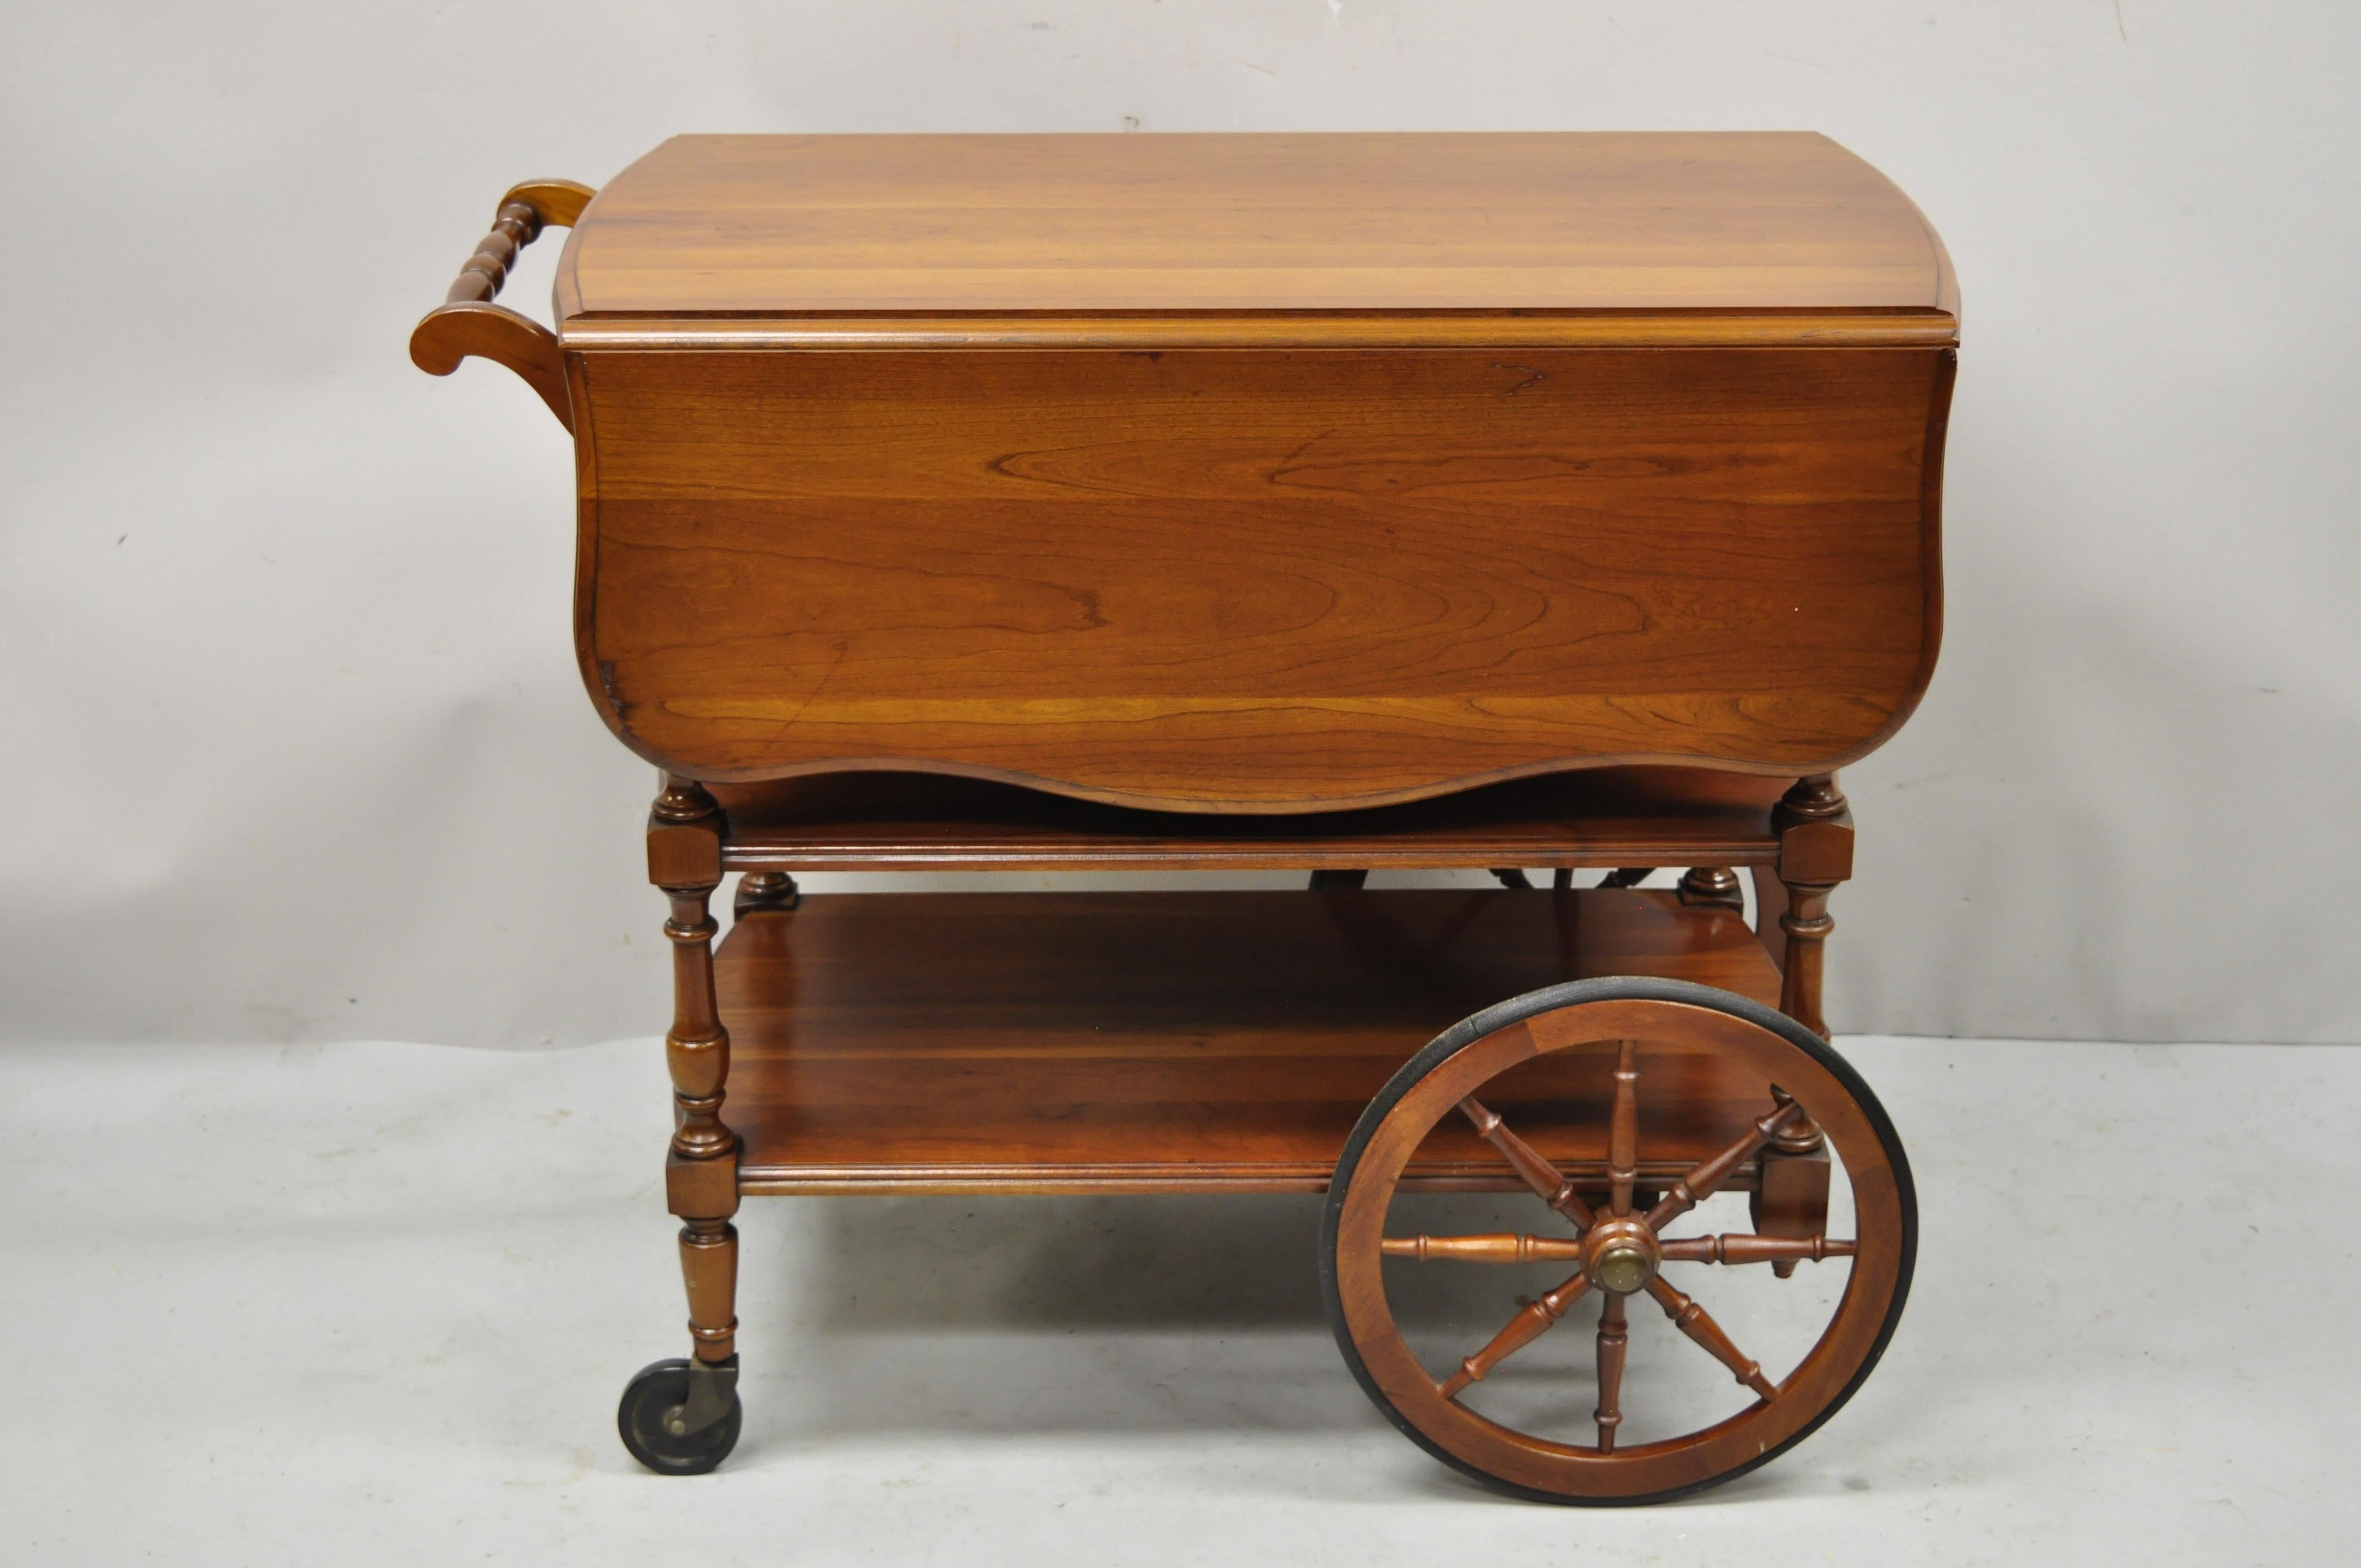 Vintage Pennsylvania House cherry wood drop leaf rolling tea cart server with drawer. Item features drop leaf sides, 2 lower shelves, rolling wheels, solid cherry wood construction, beautiful wood grain, original label, 1 drawer, very nice vintage